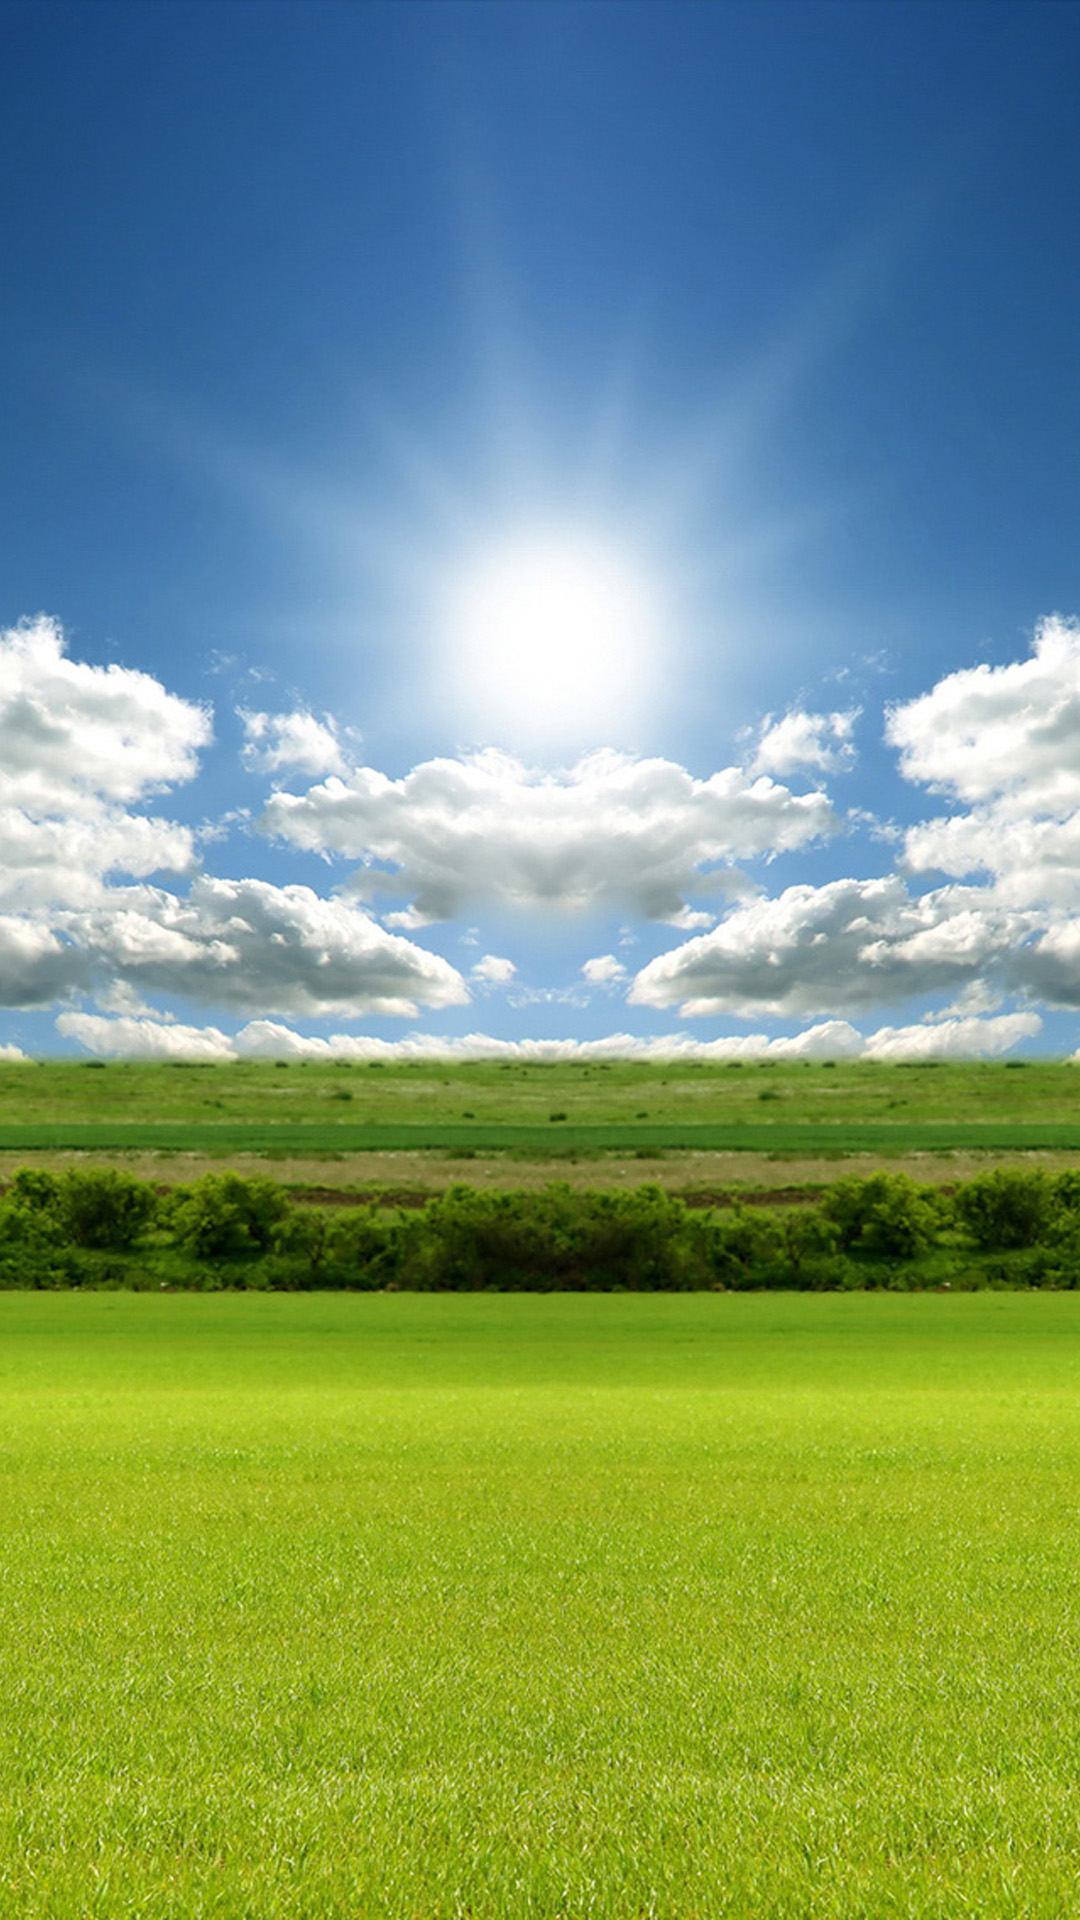 Grass Sun and Sky - HD Wallpapers and